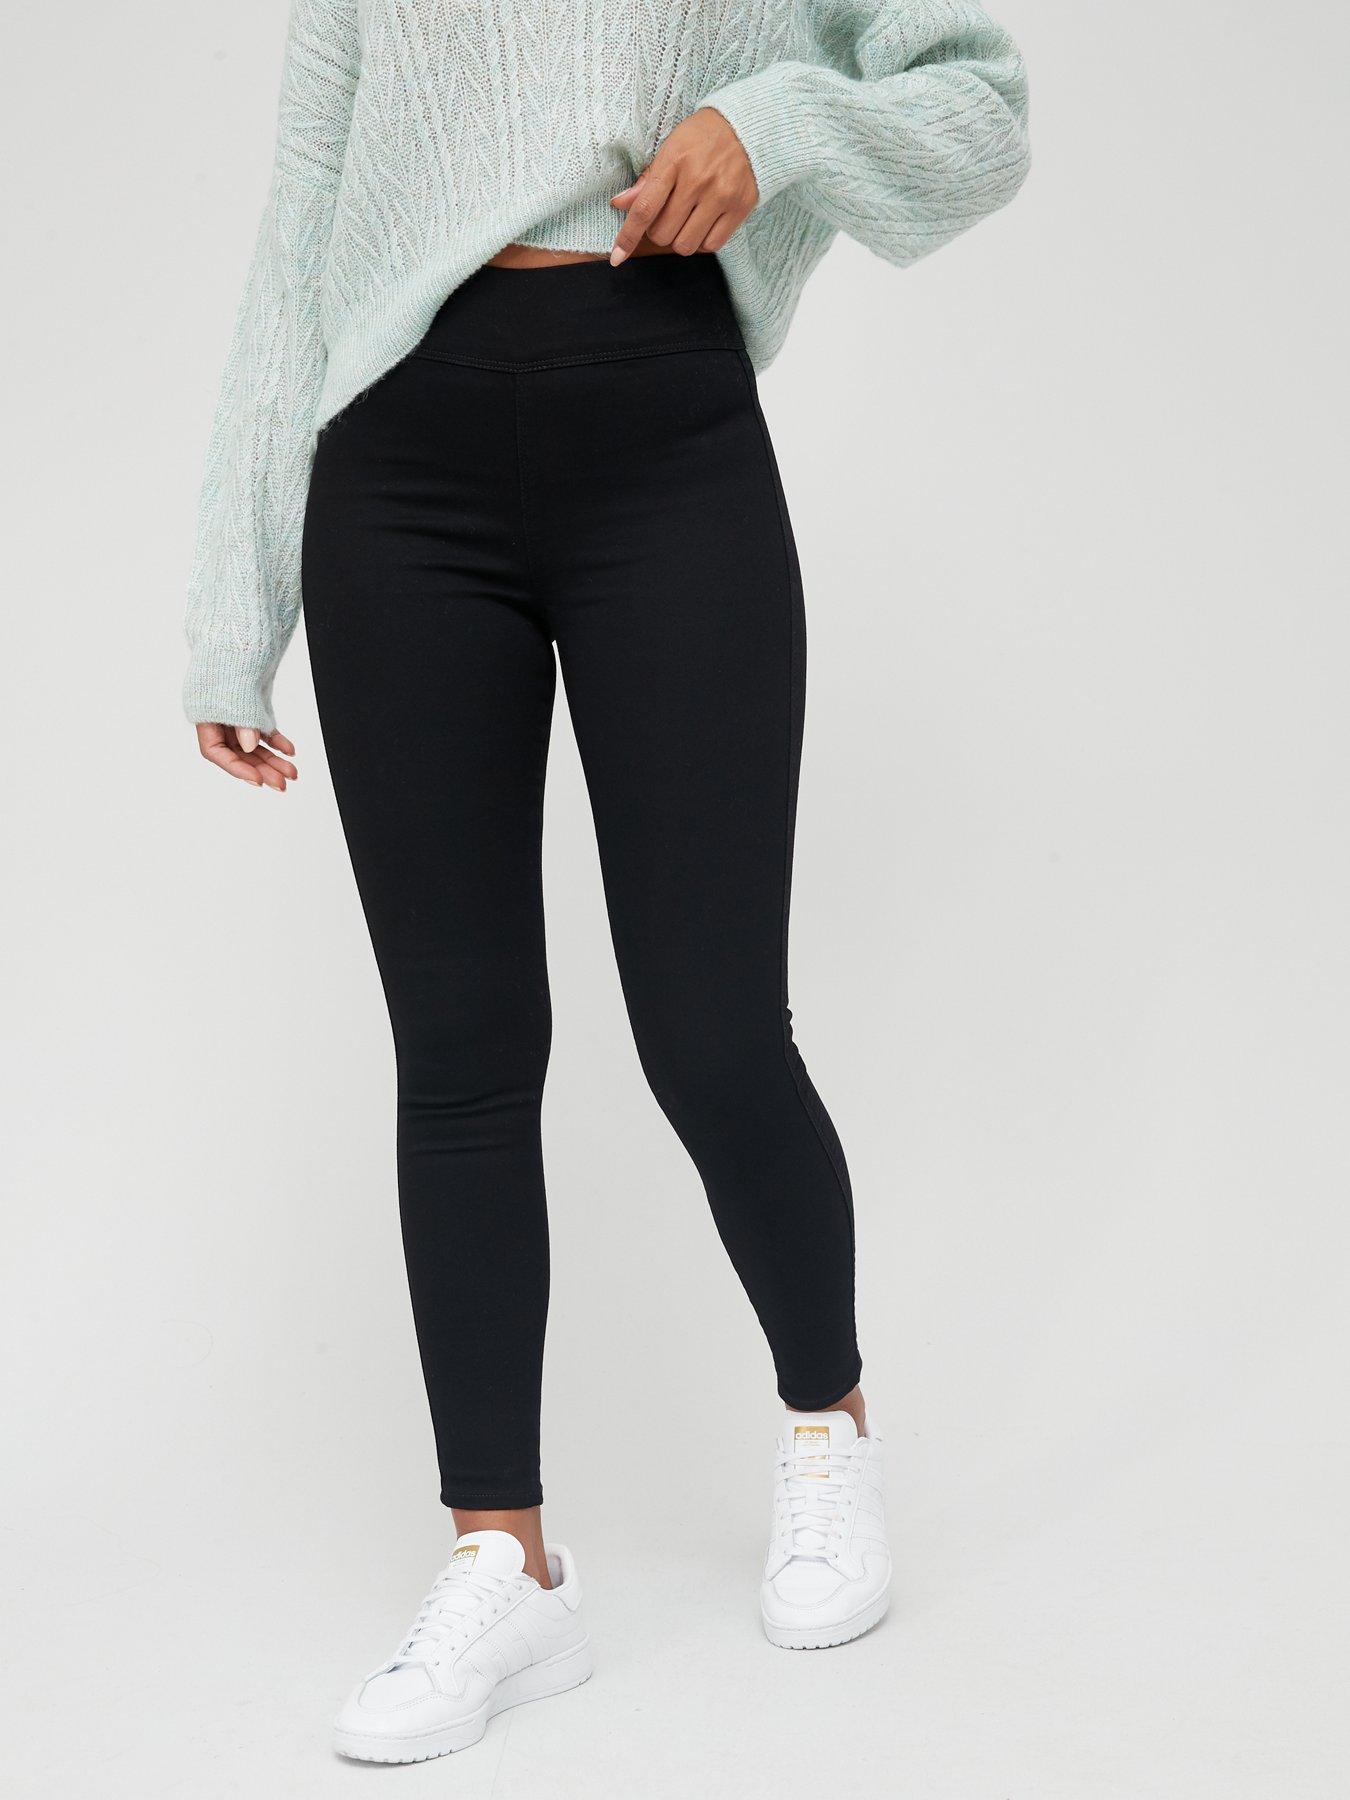 jeggings for tall ladies